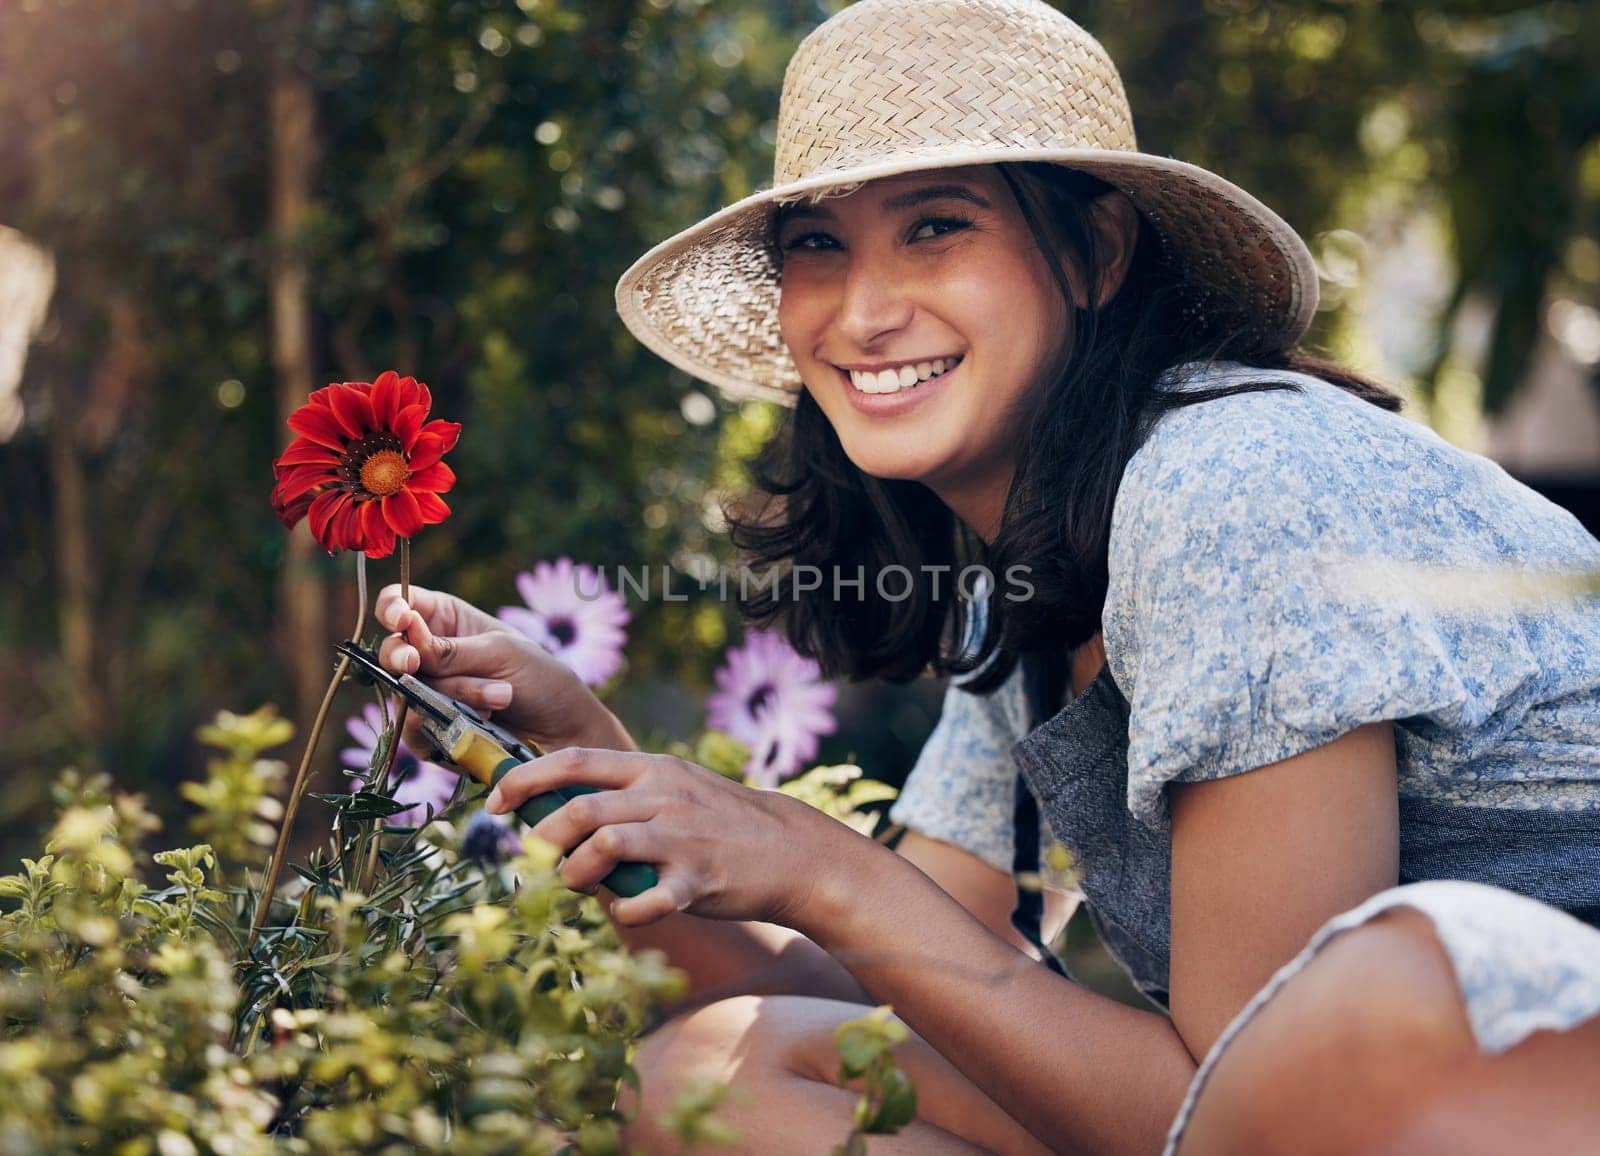 Flowers, cut or portrait of girl florist gardening natural red plant for growth, development or nursery. Gardener, scissor or happy woman farming for nature, horticulture and floral sustainability.